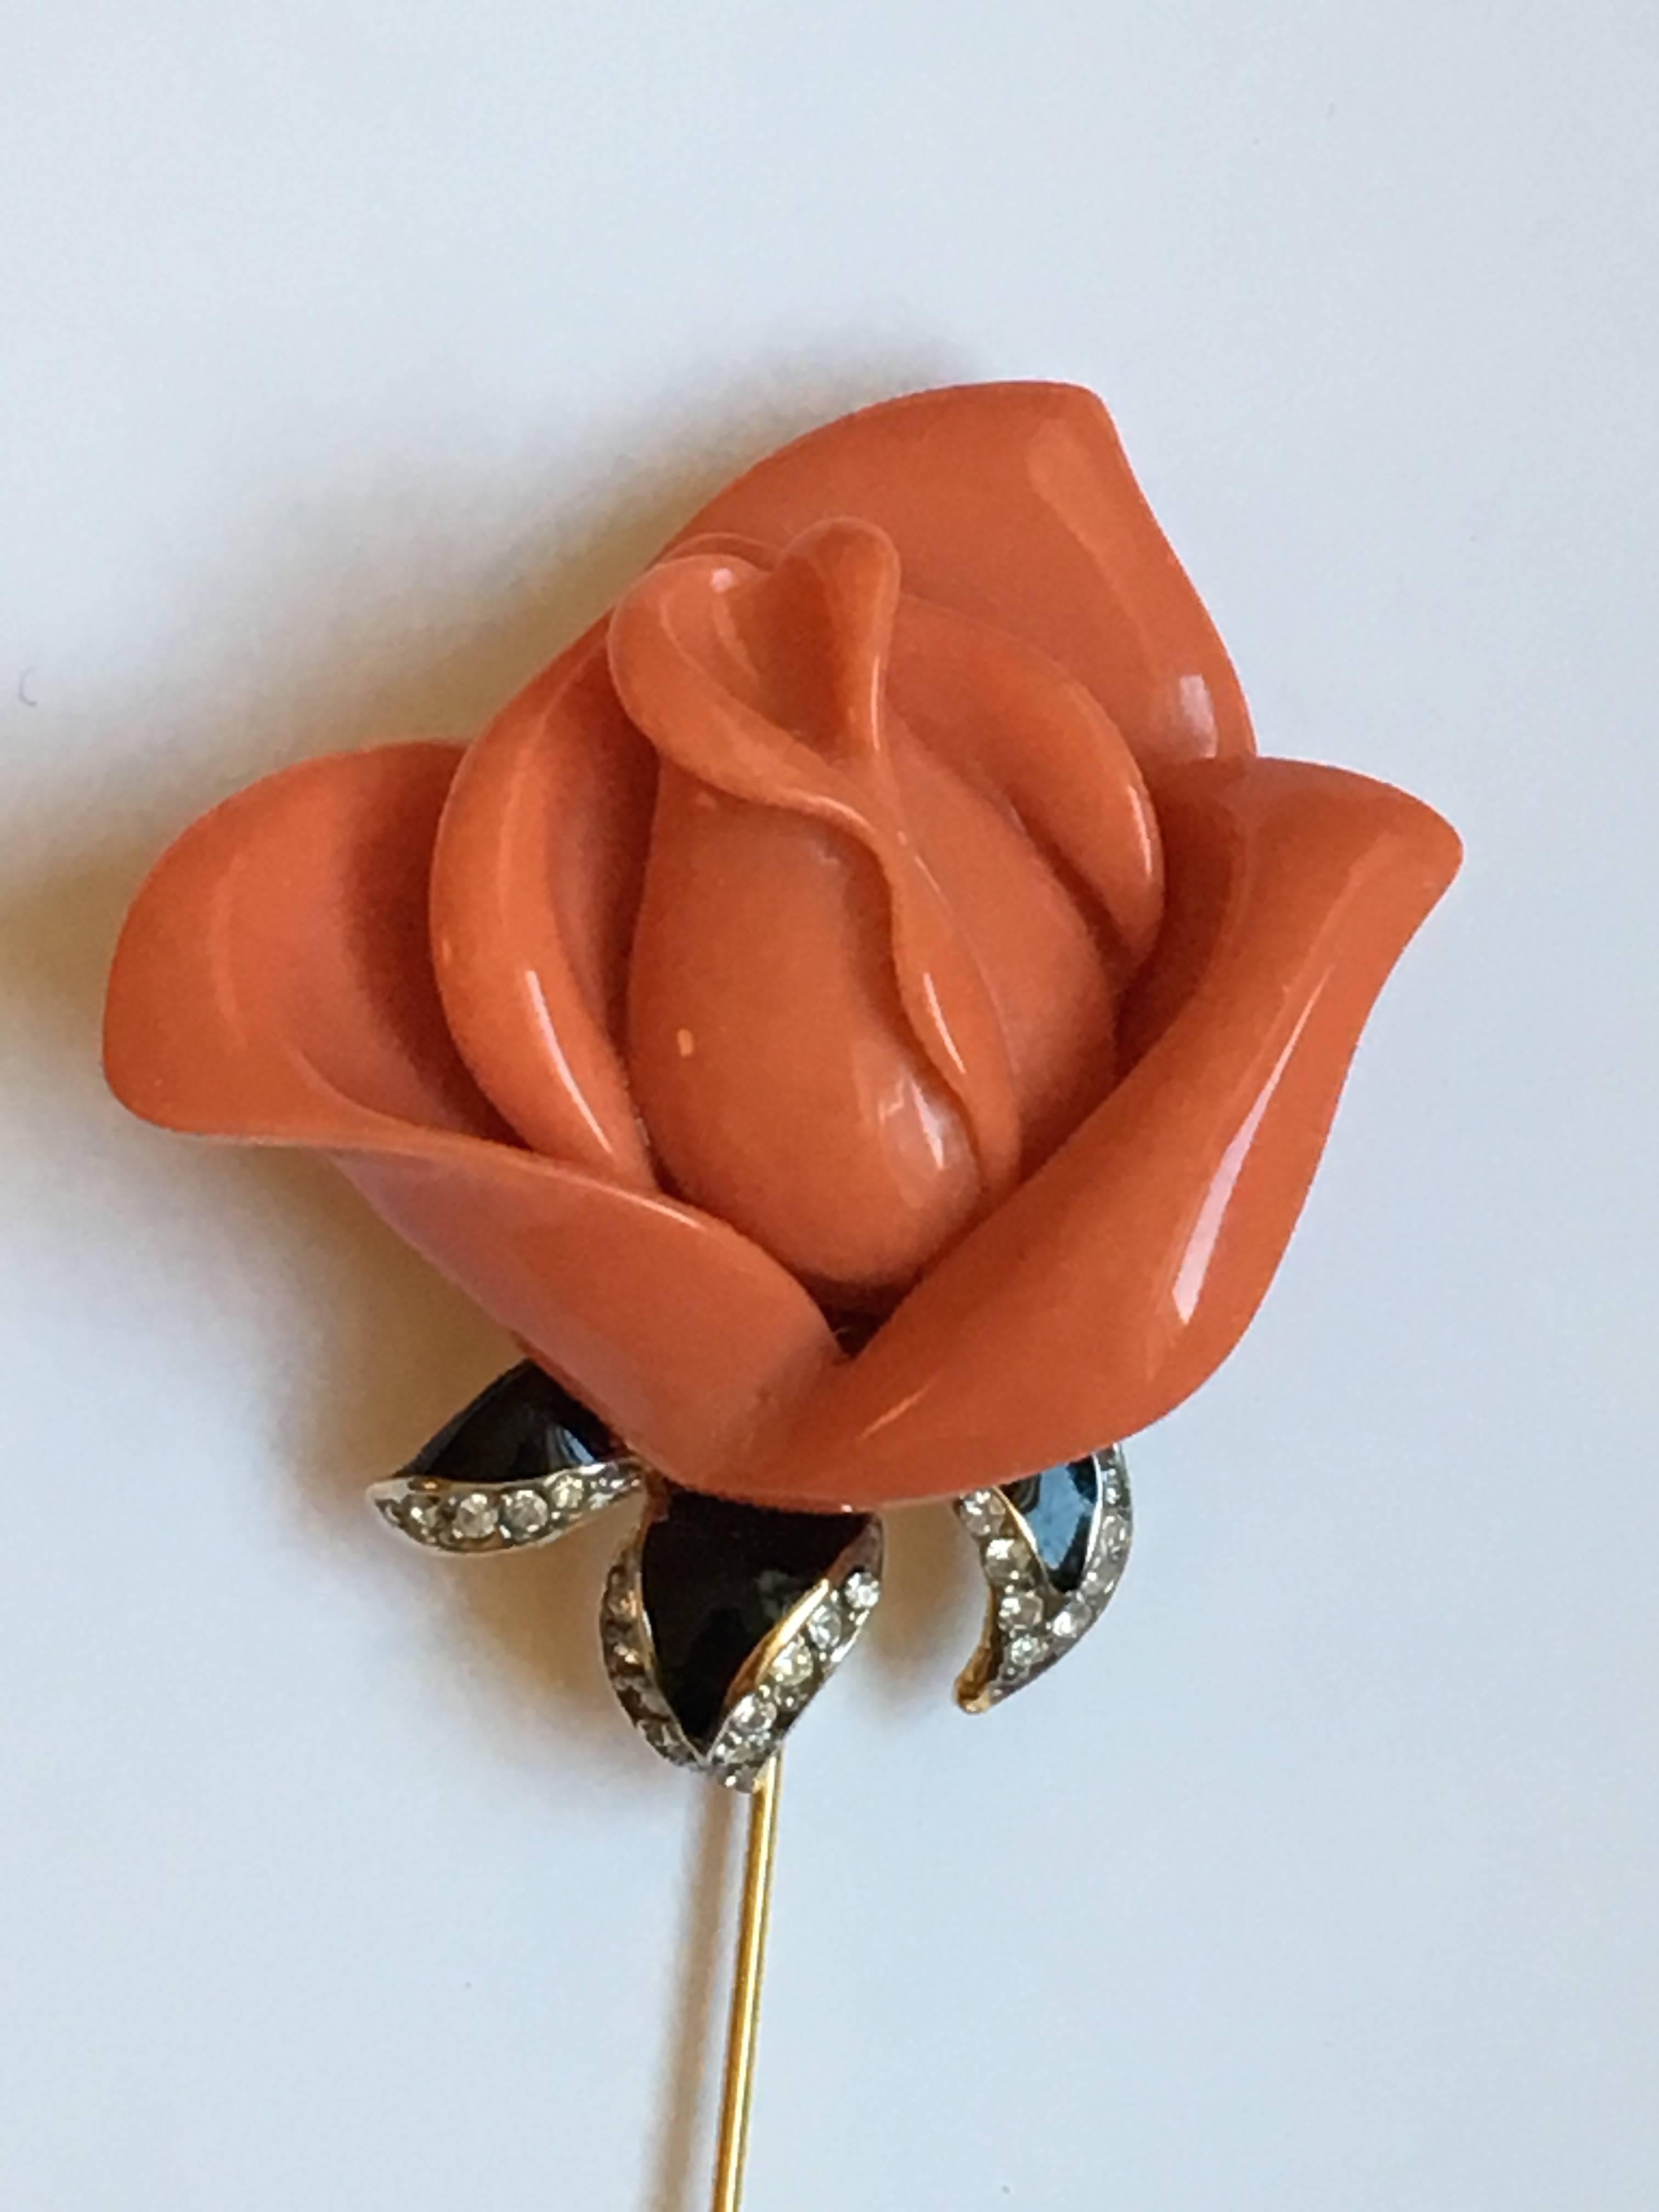 This is a great stick pin from Kenneth Jay Lane. The rose is made out of a coral colored resin. The rose's leaves are a black enamel highlighted with clear colored rhinestones. The back is marked 'Kenneth Lane' in an oval shaped plaque. It measures